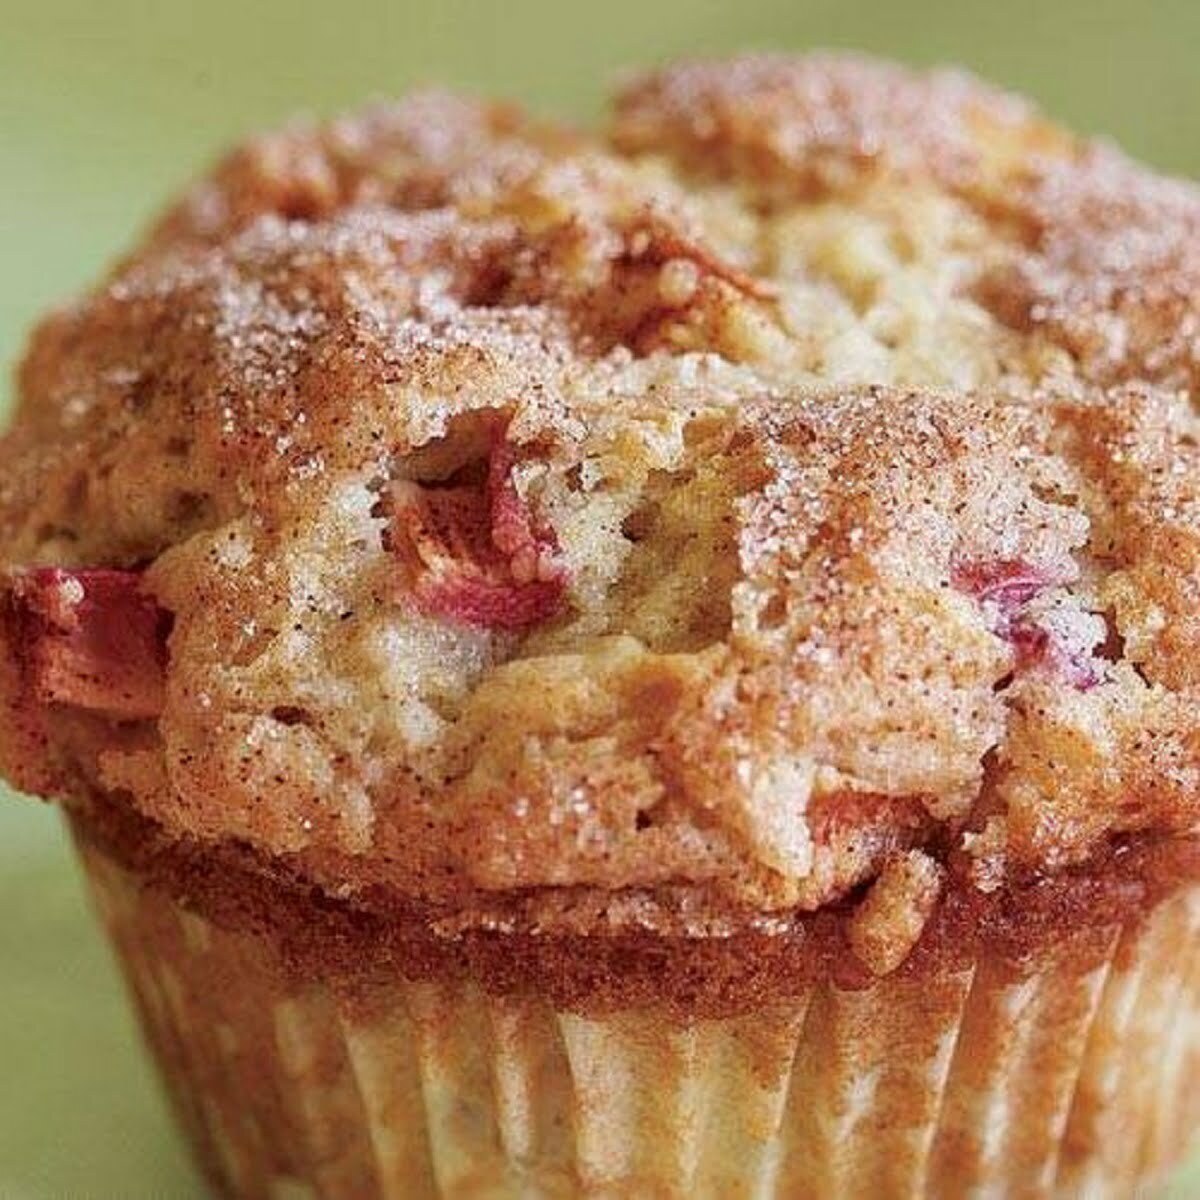 Rhubarb Muffins - The Recipe Website - Totally Tasty